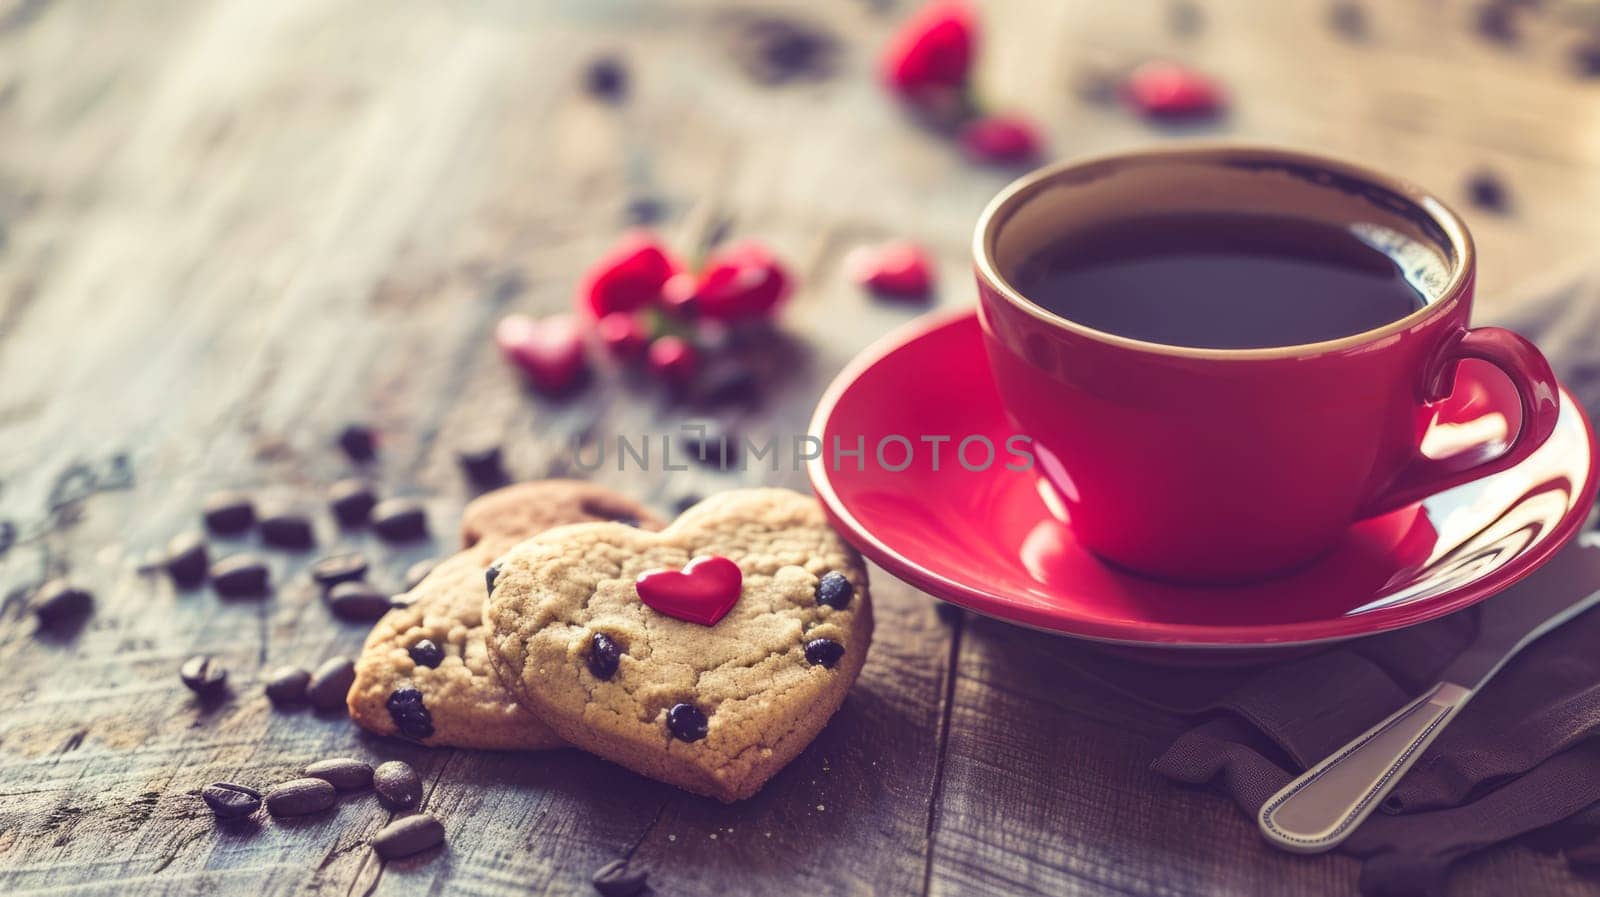 Homemade heart shaped cookies and a cup of tea or coffee on the table. Copy space.